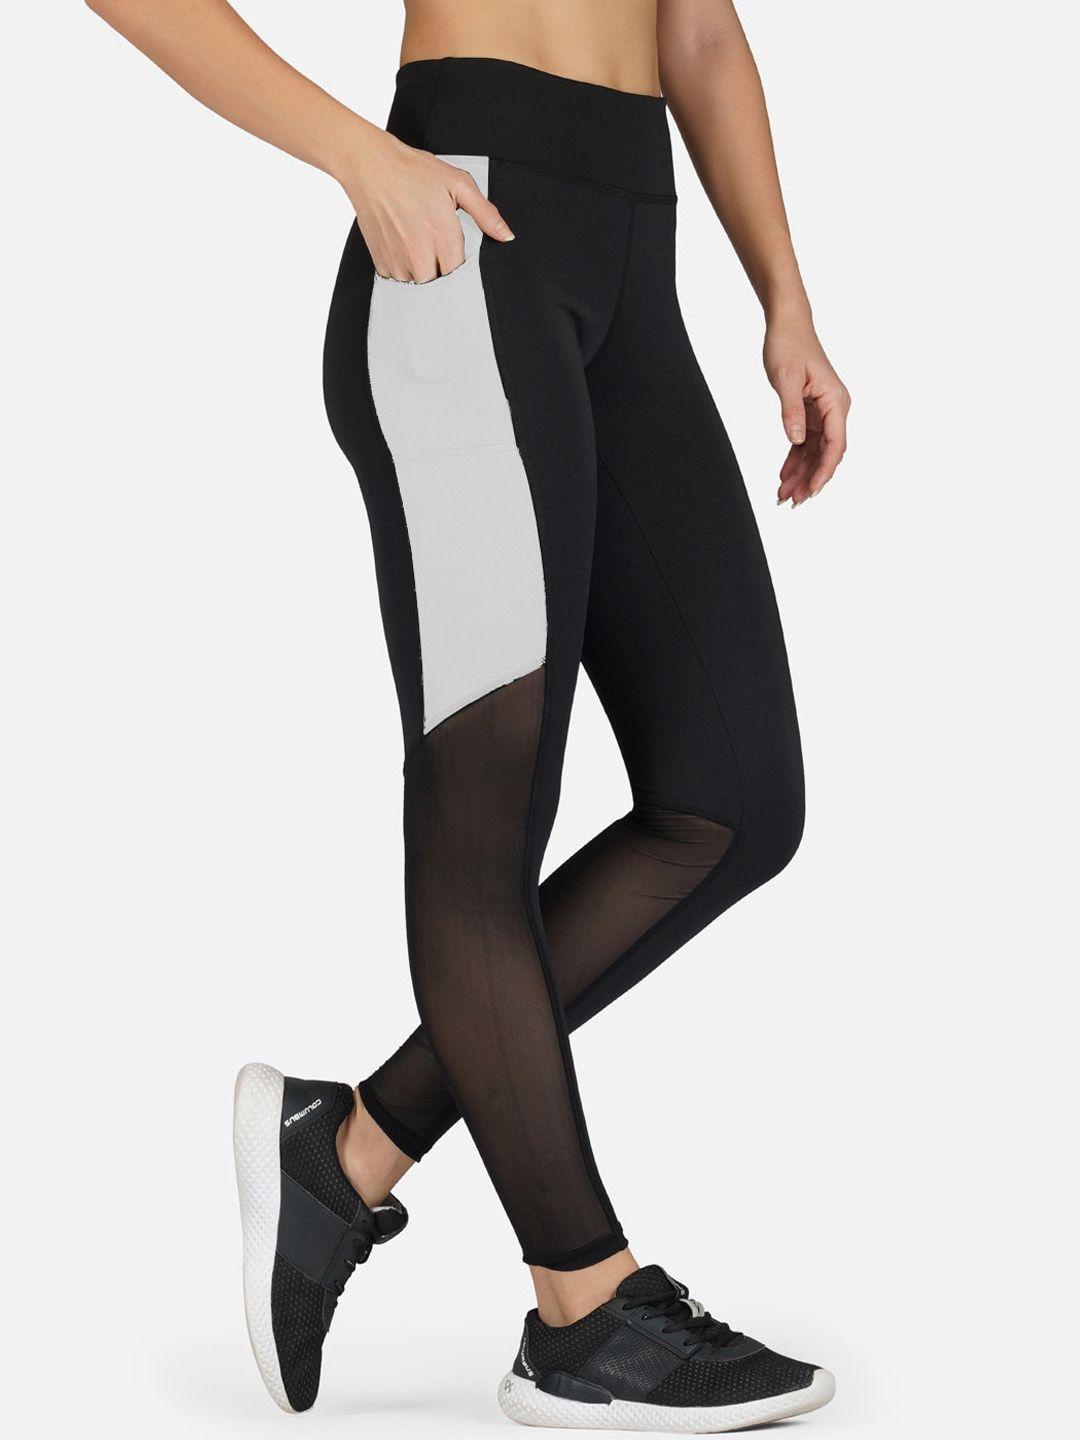 imperative-women-colourblocked-high-rise-slim-fit-antimicrobial-ankle-length-gym-tights